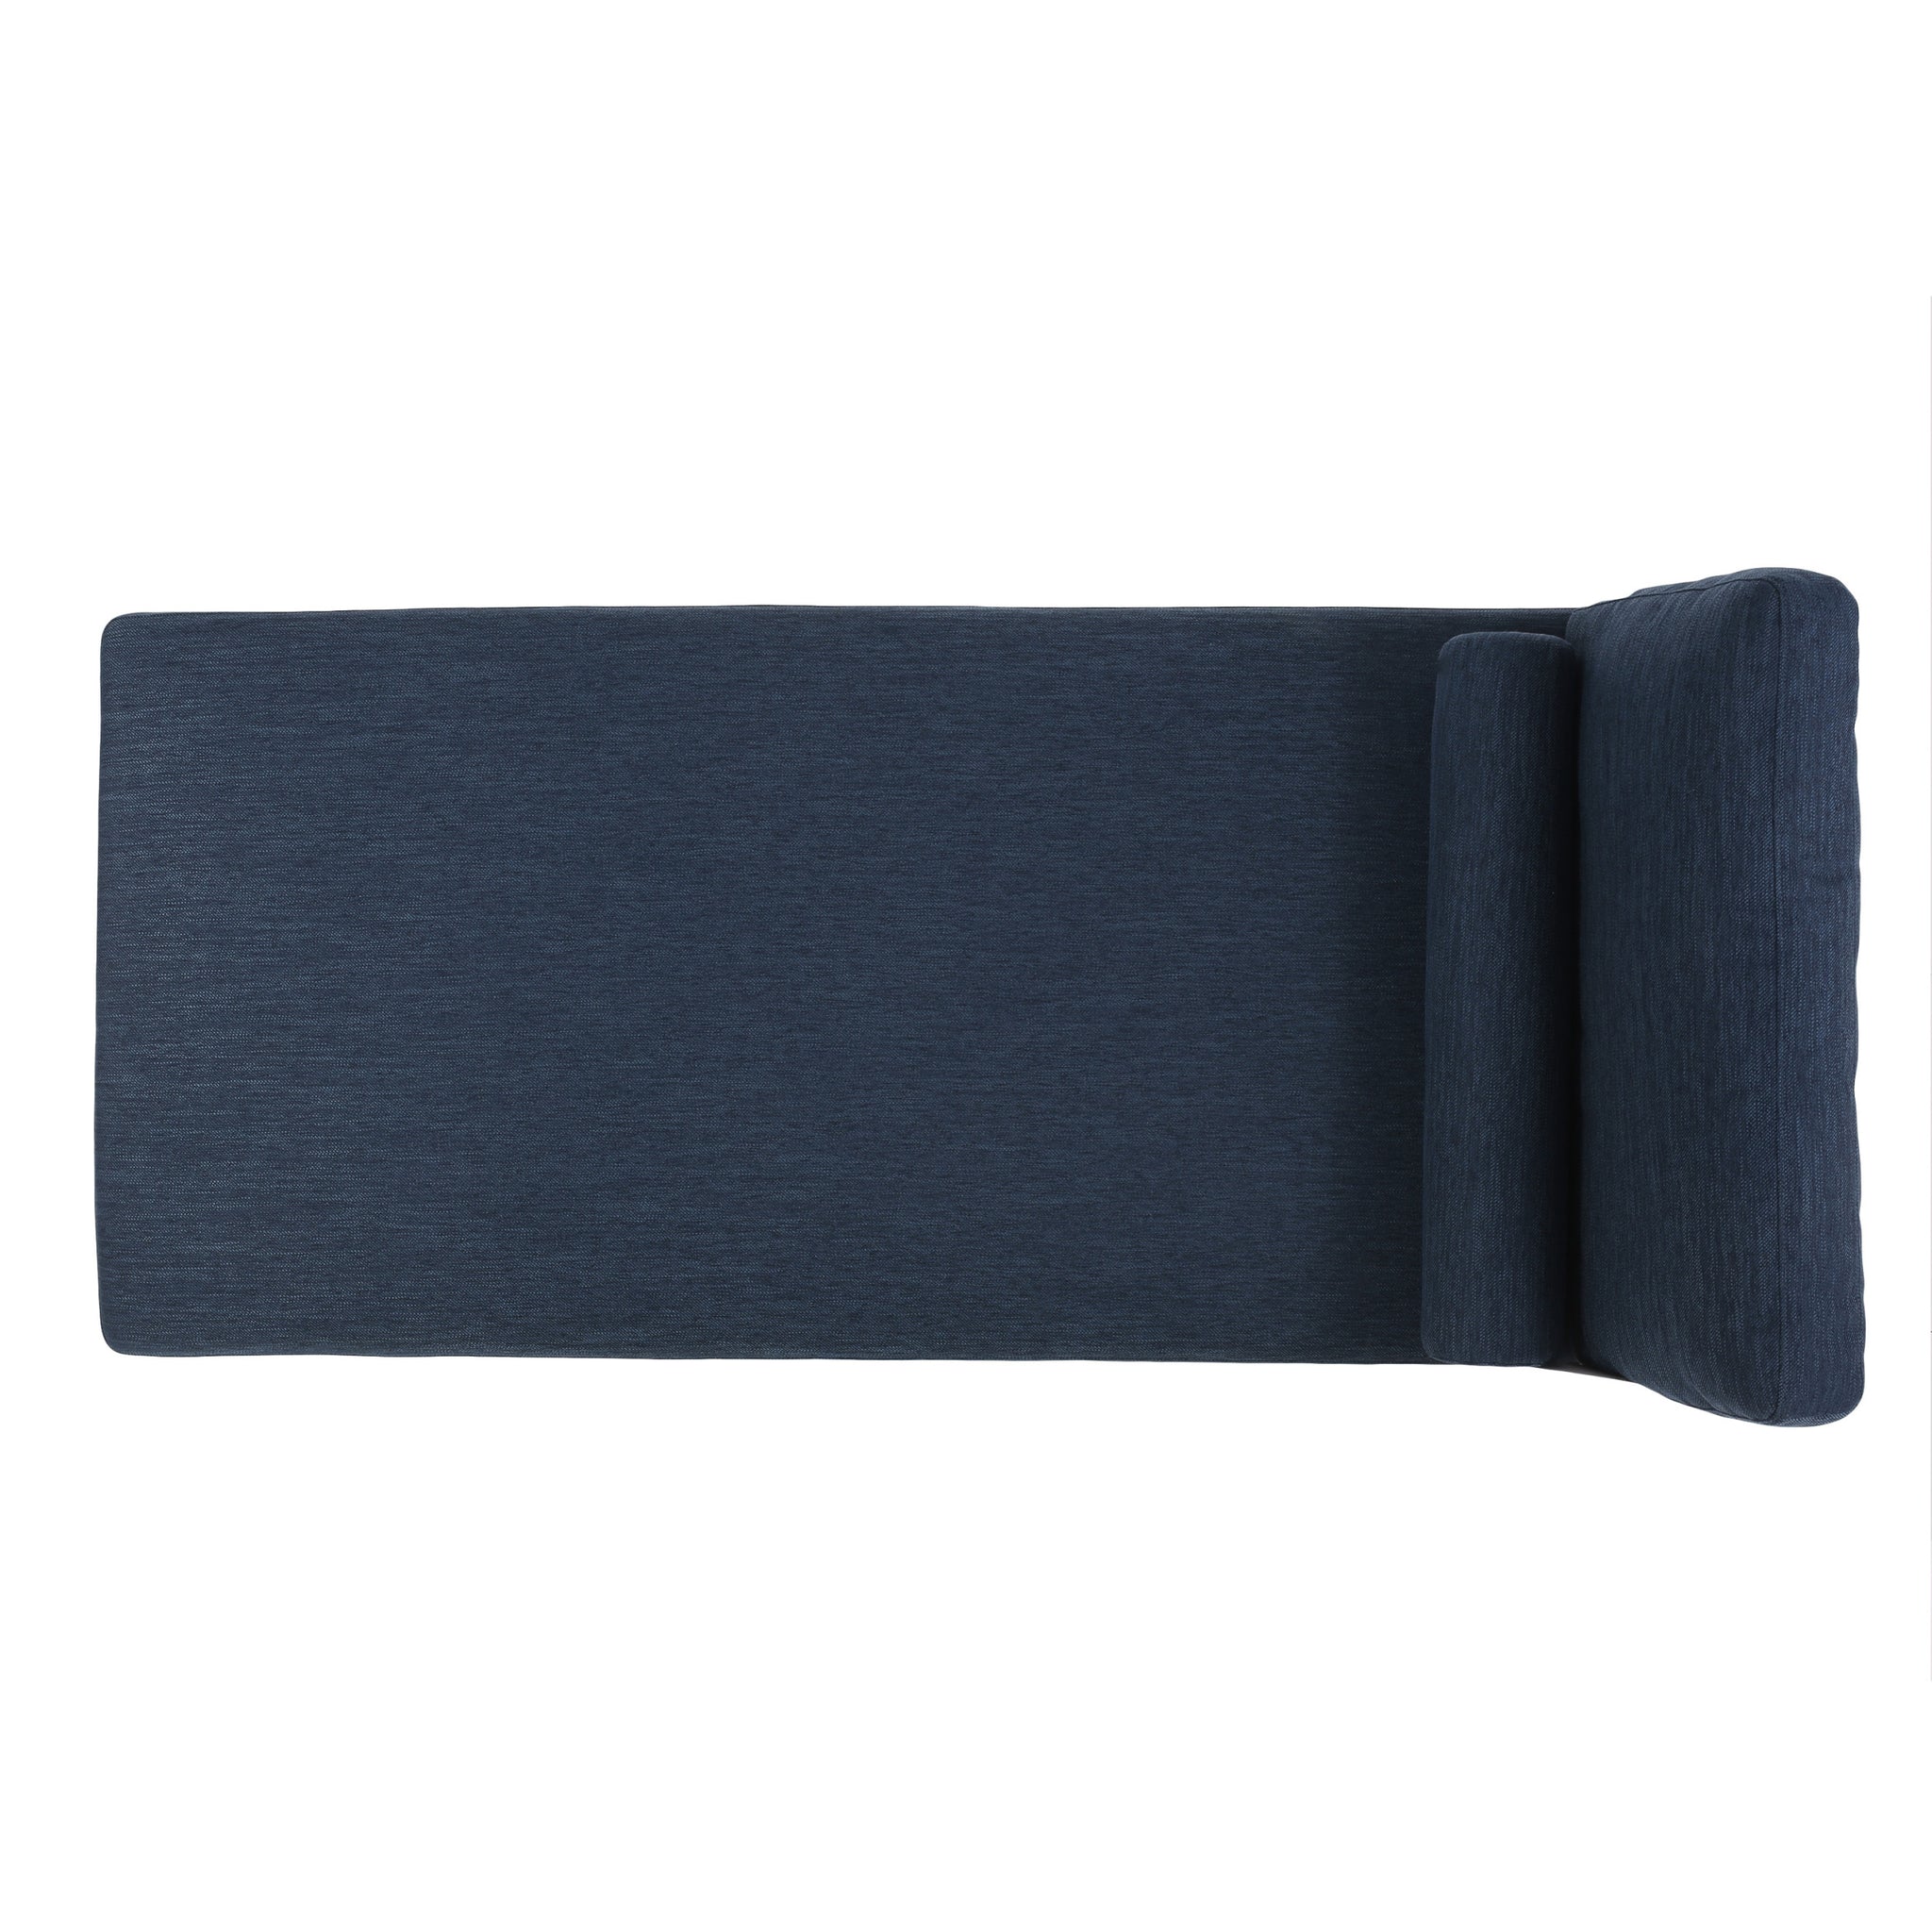 CHAISE LOUNGE navy blue-fabric